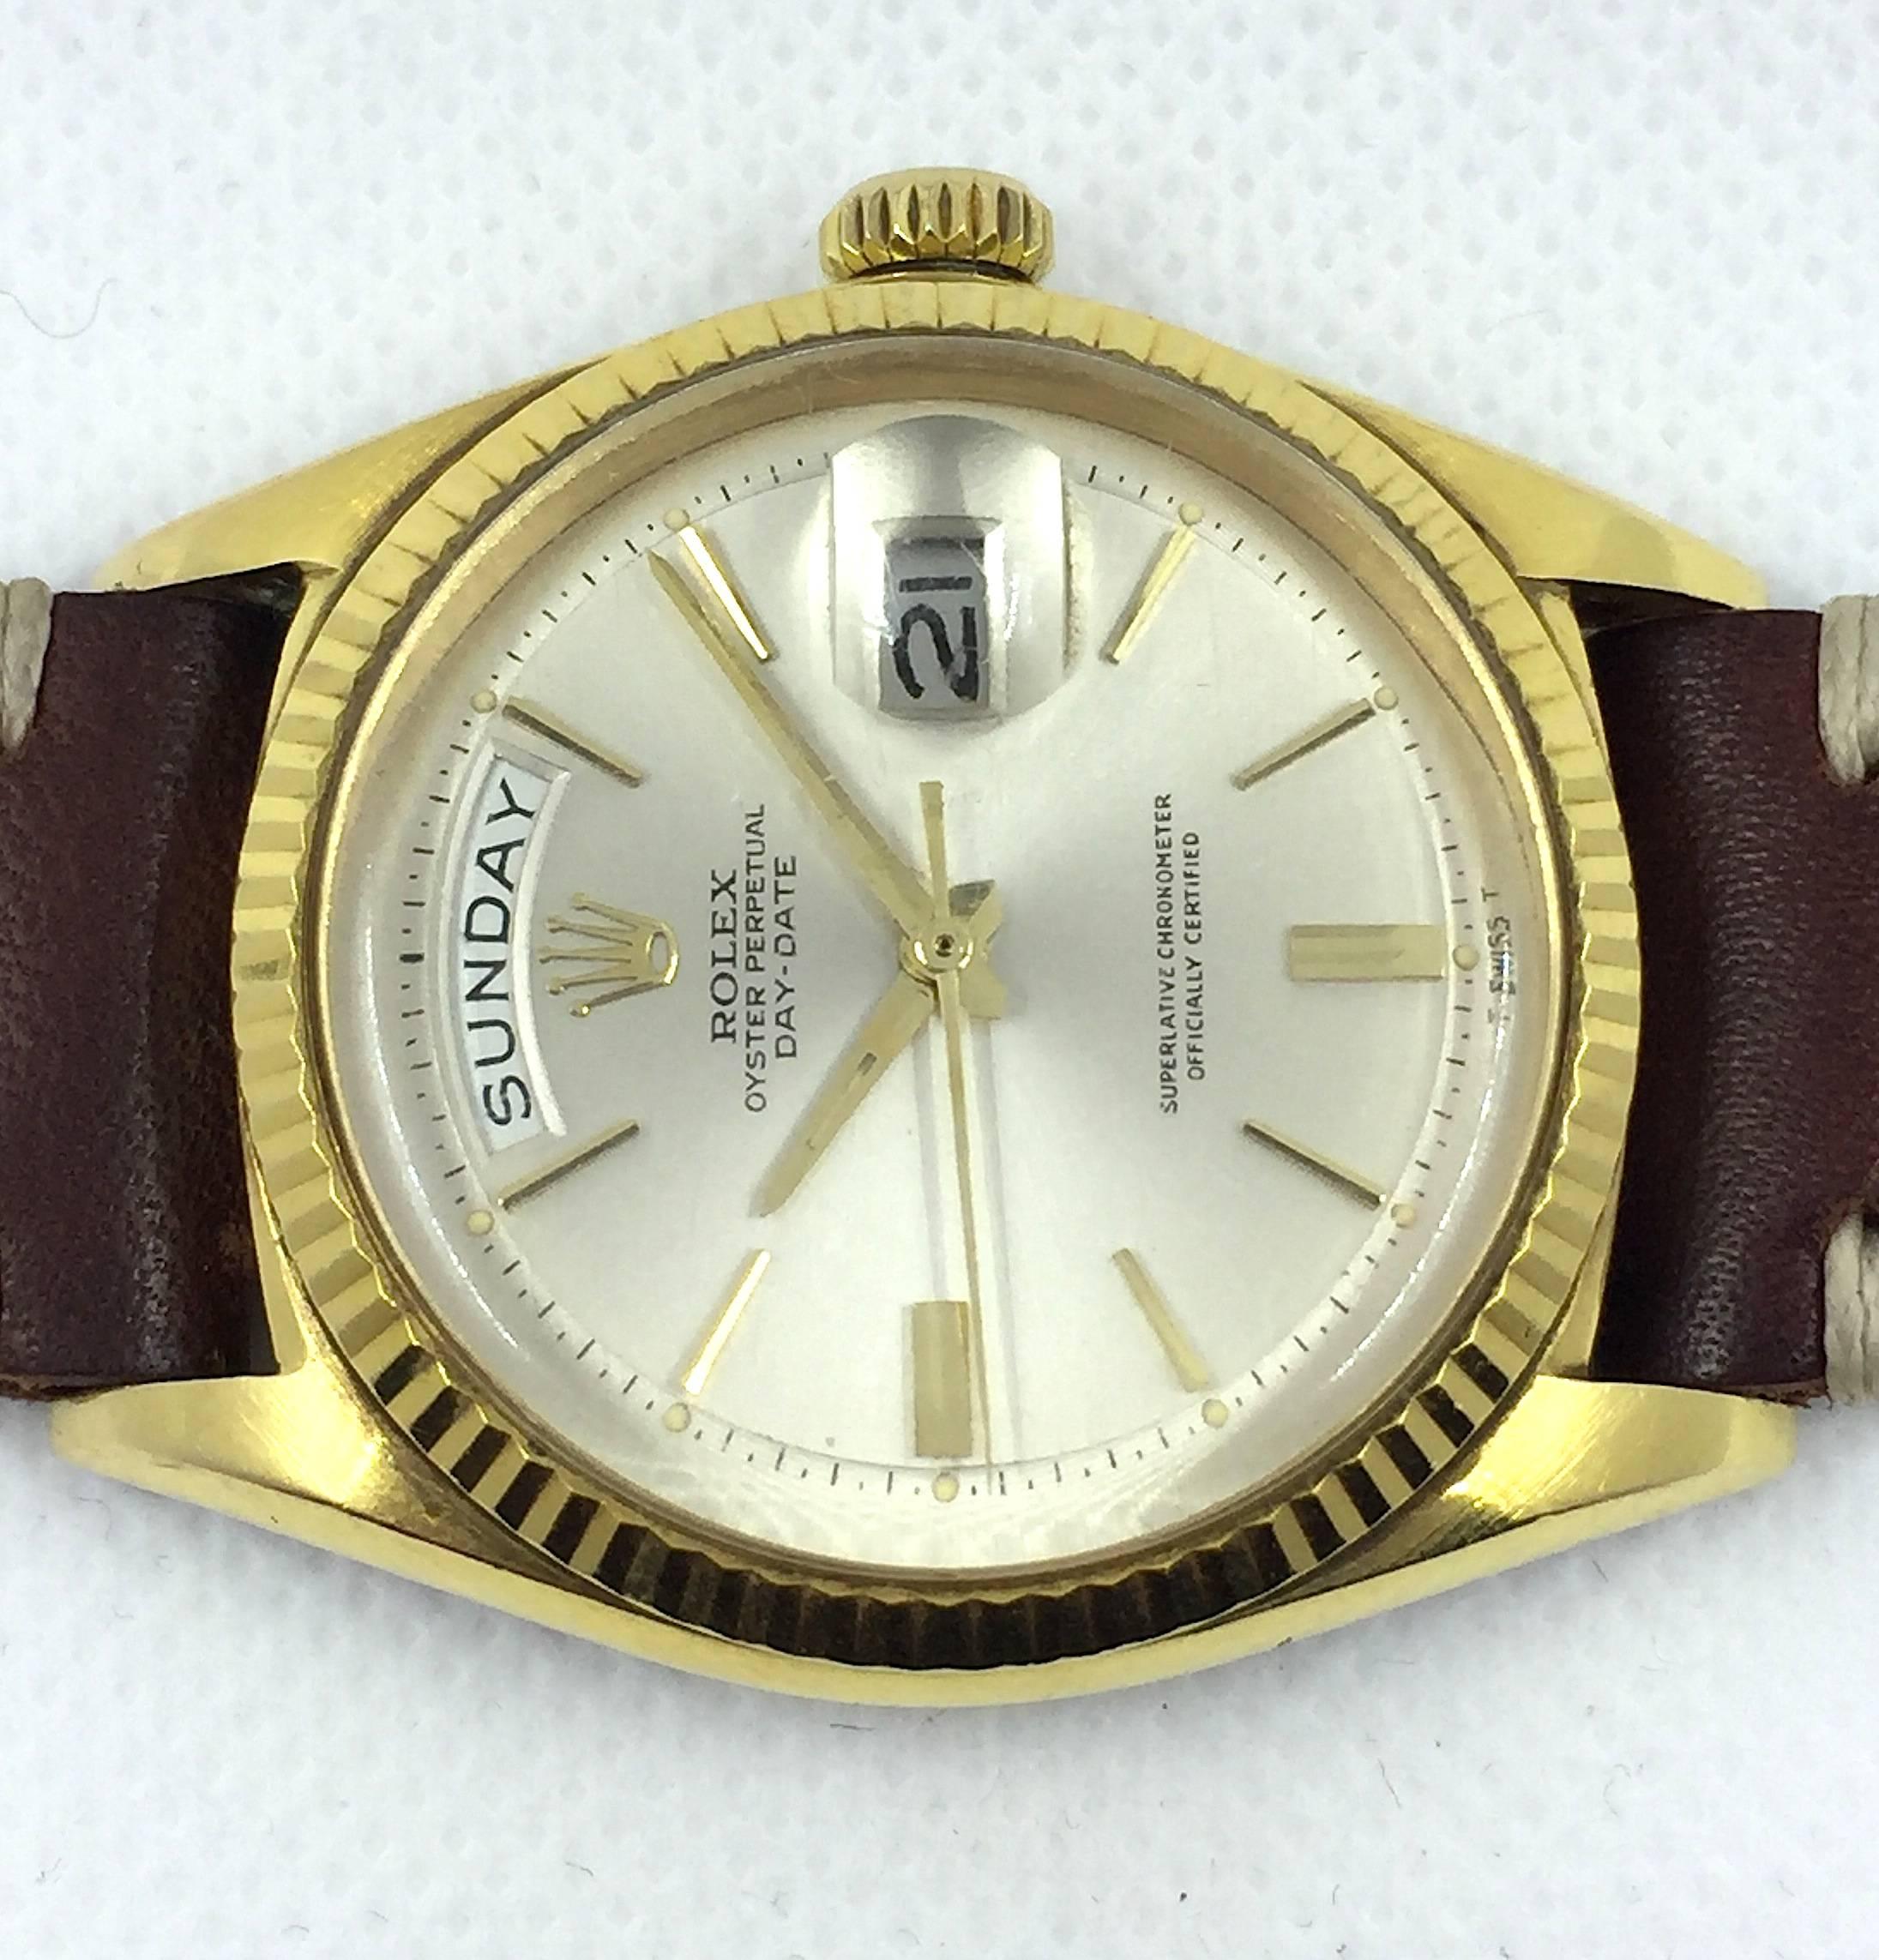 Women's or Men's Rolex Yellow Gold Day-Date Chronometer Automatic Wristwatch 